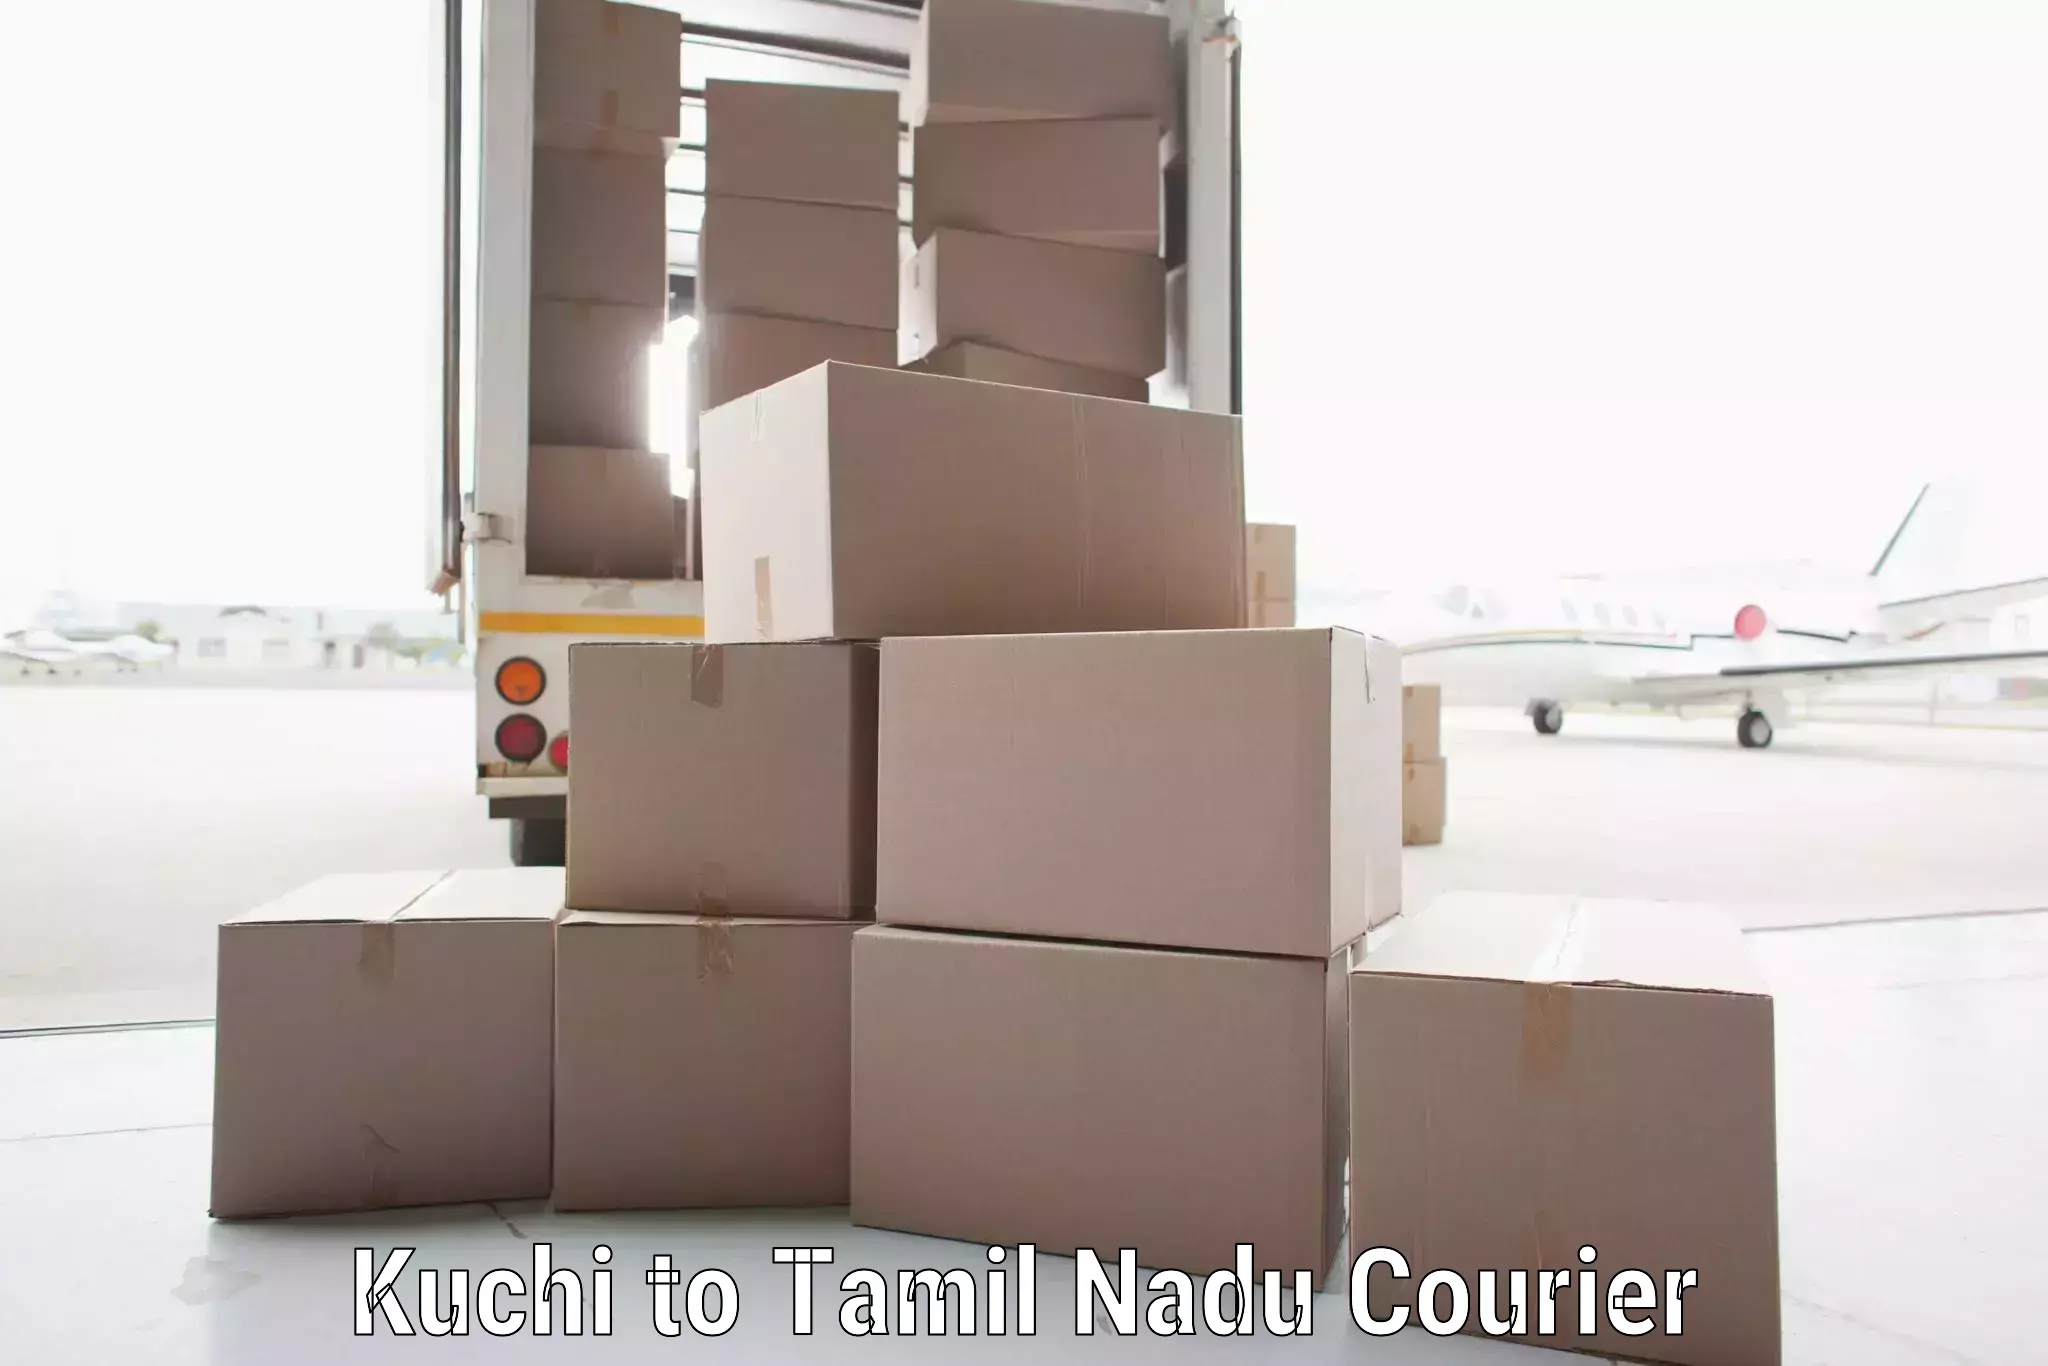 Reliable delivery network Kuchi to Ennore Port Chennai